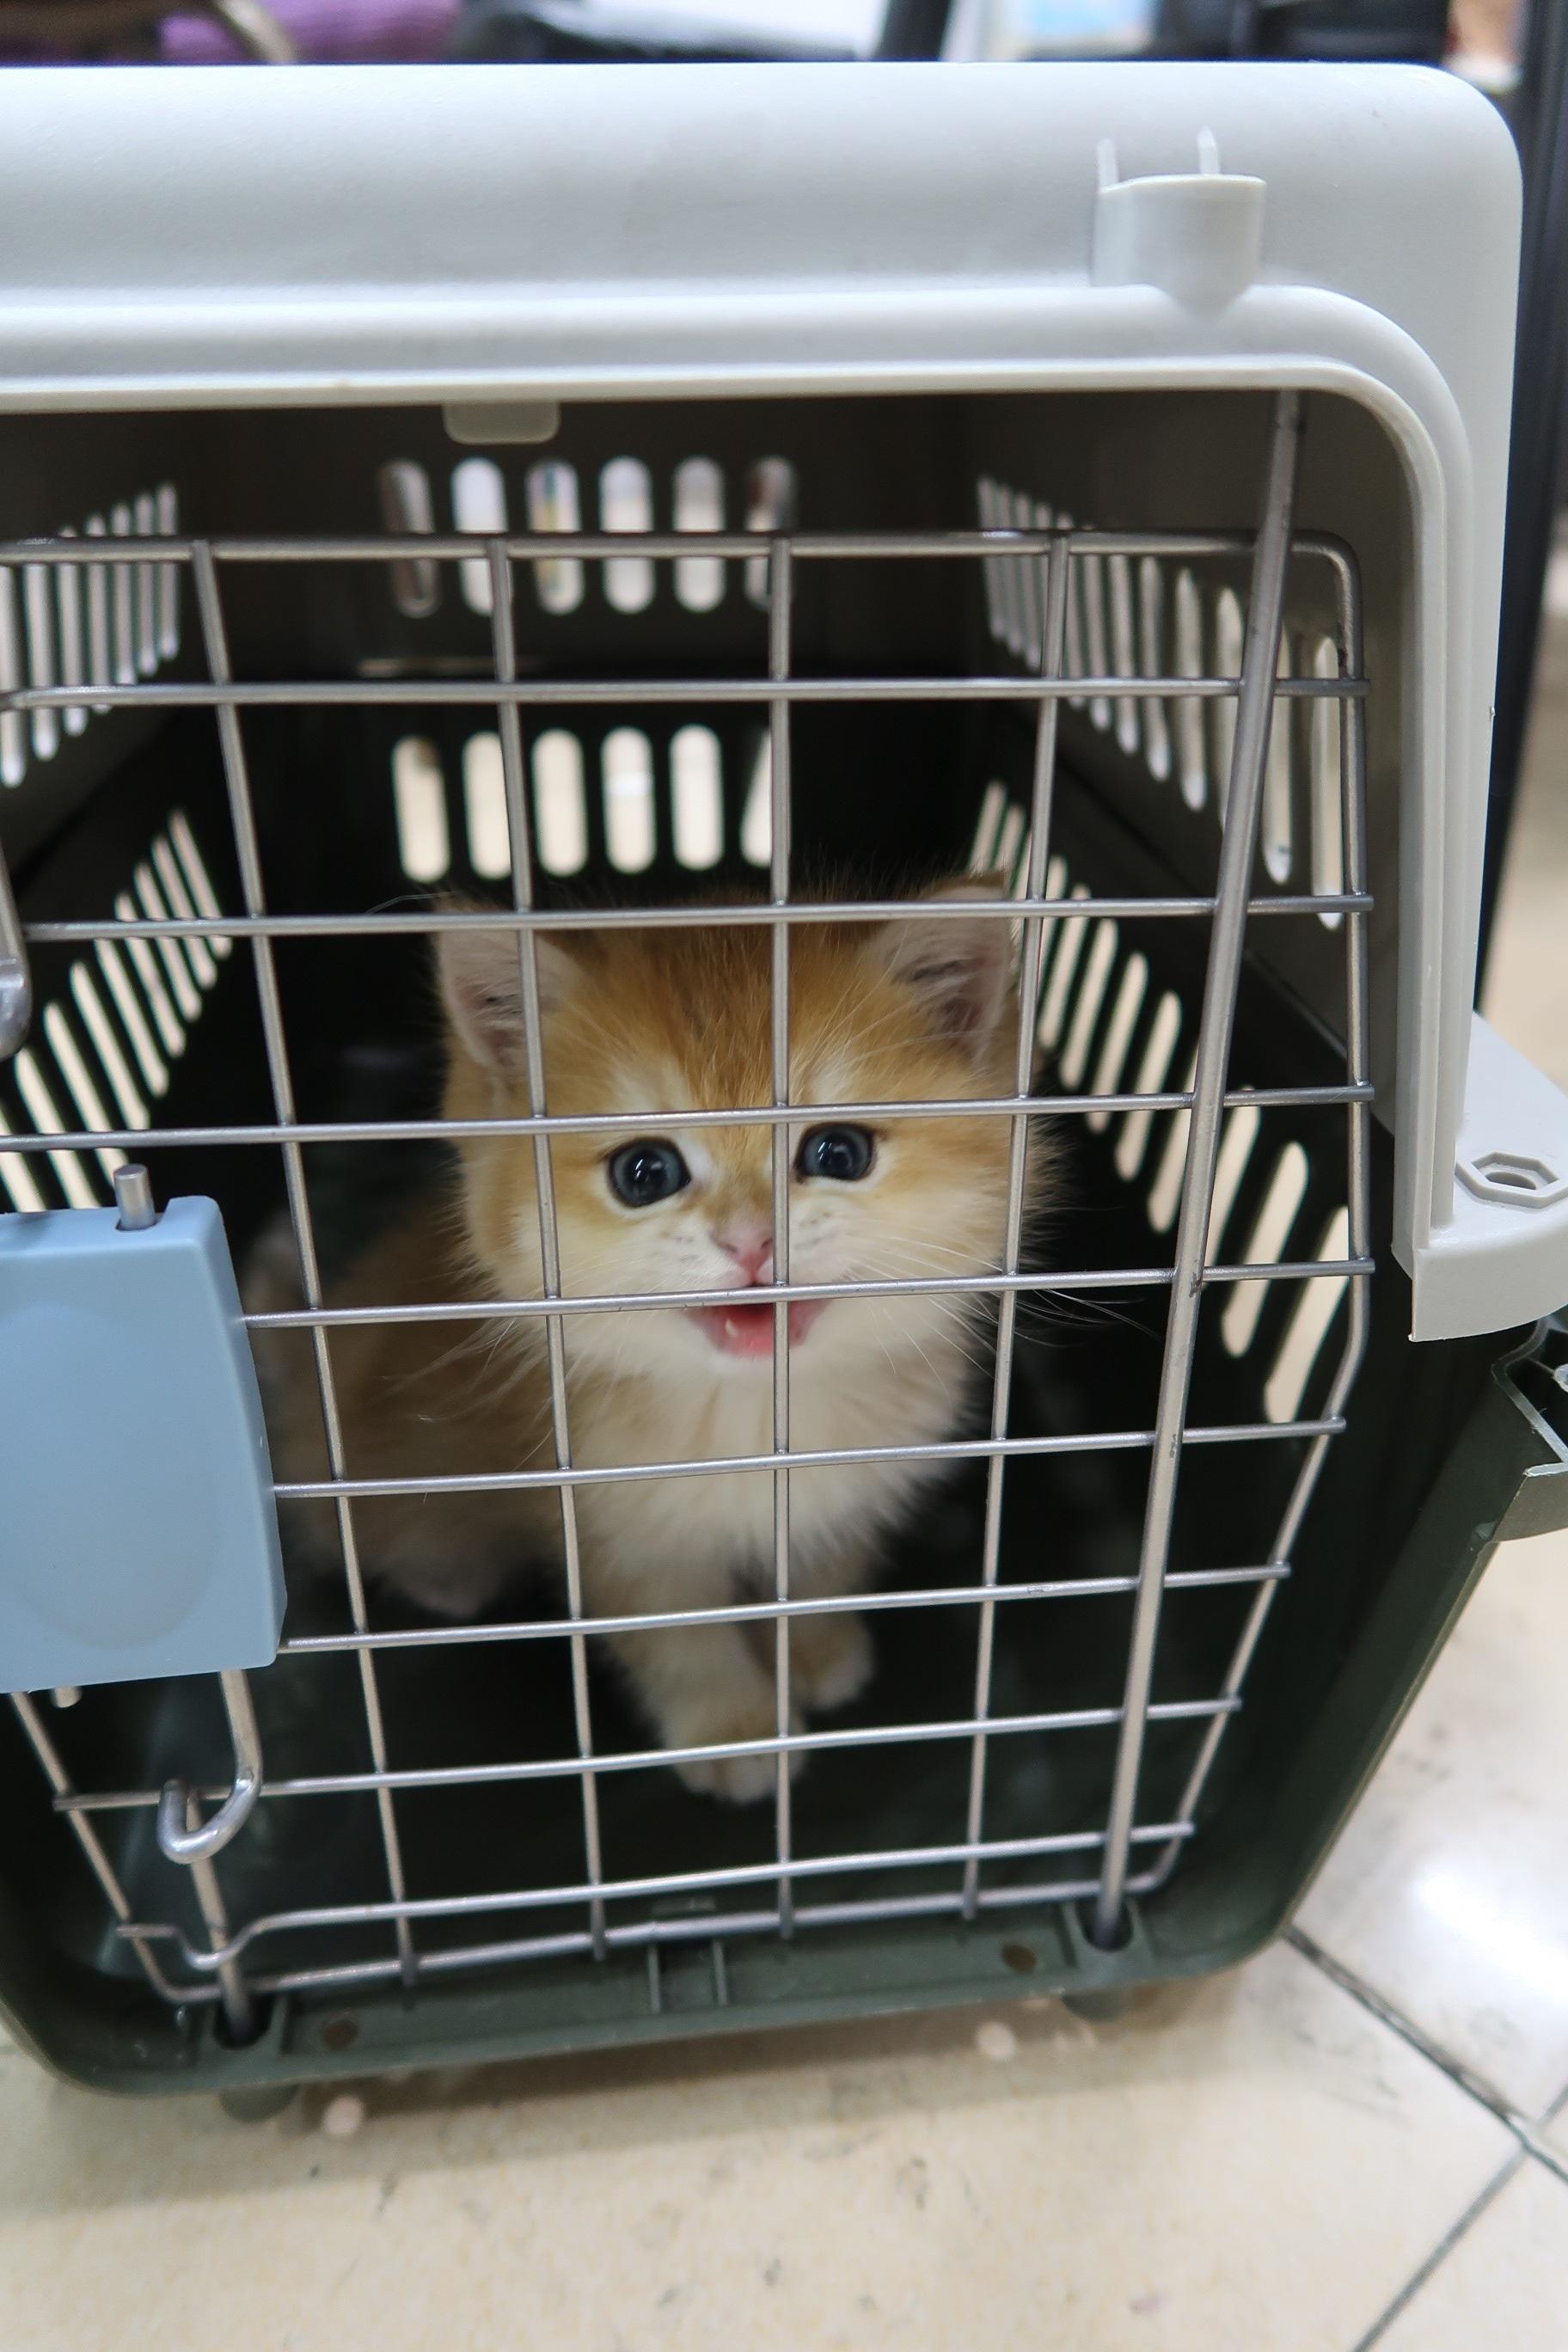 Hong Kong Customs today (December 1) mounted an anti-smuggling operation in Sha Tau Kok and detected a suspected case of illegally imported animals. Five suspected illegally imported animals with an estimated market value of about $220,000 were seized. Photo shows one of the suspected illegally imported kittens.